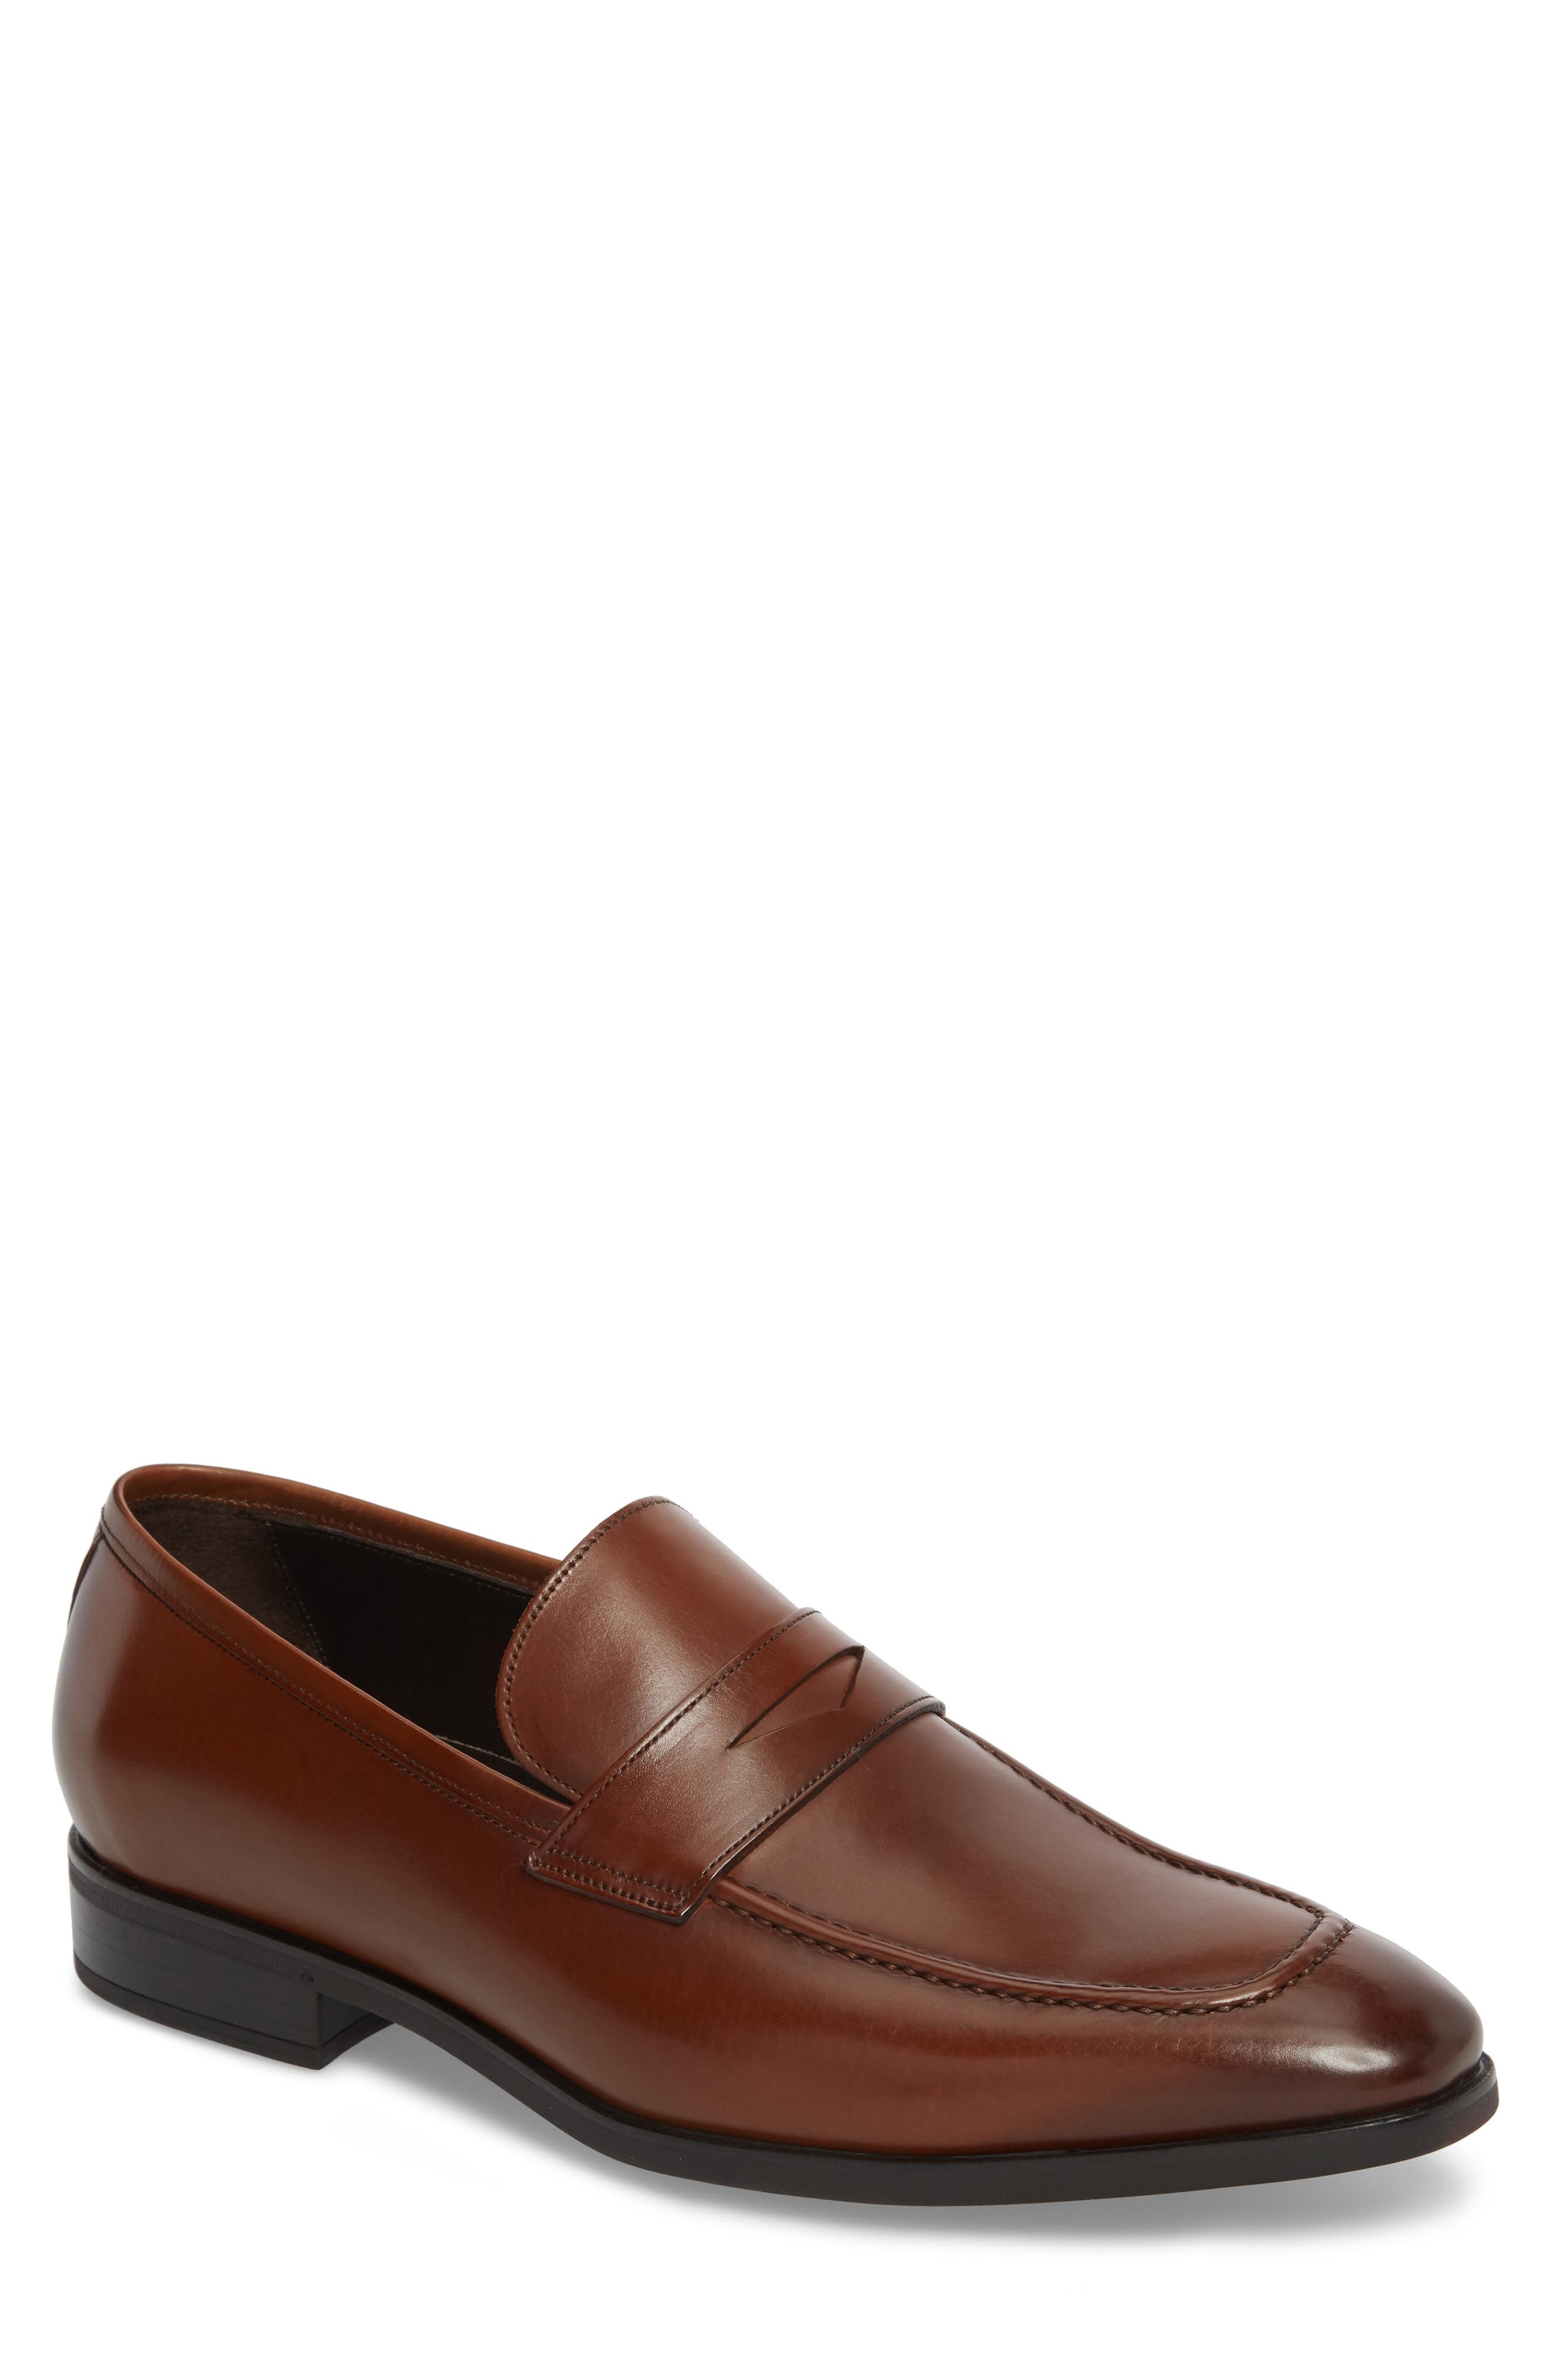 to boot new york loafers